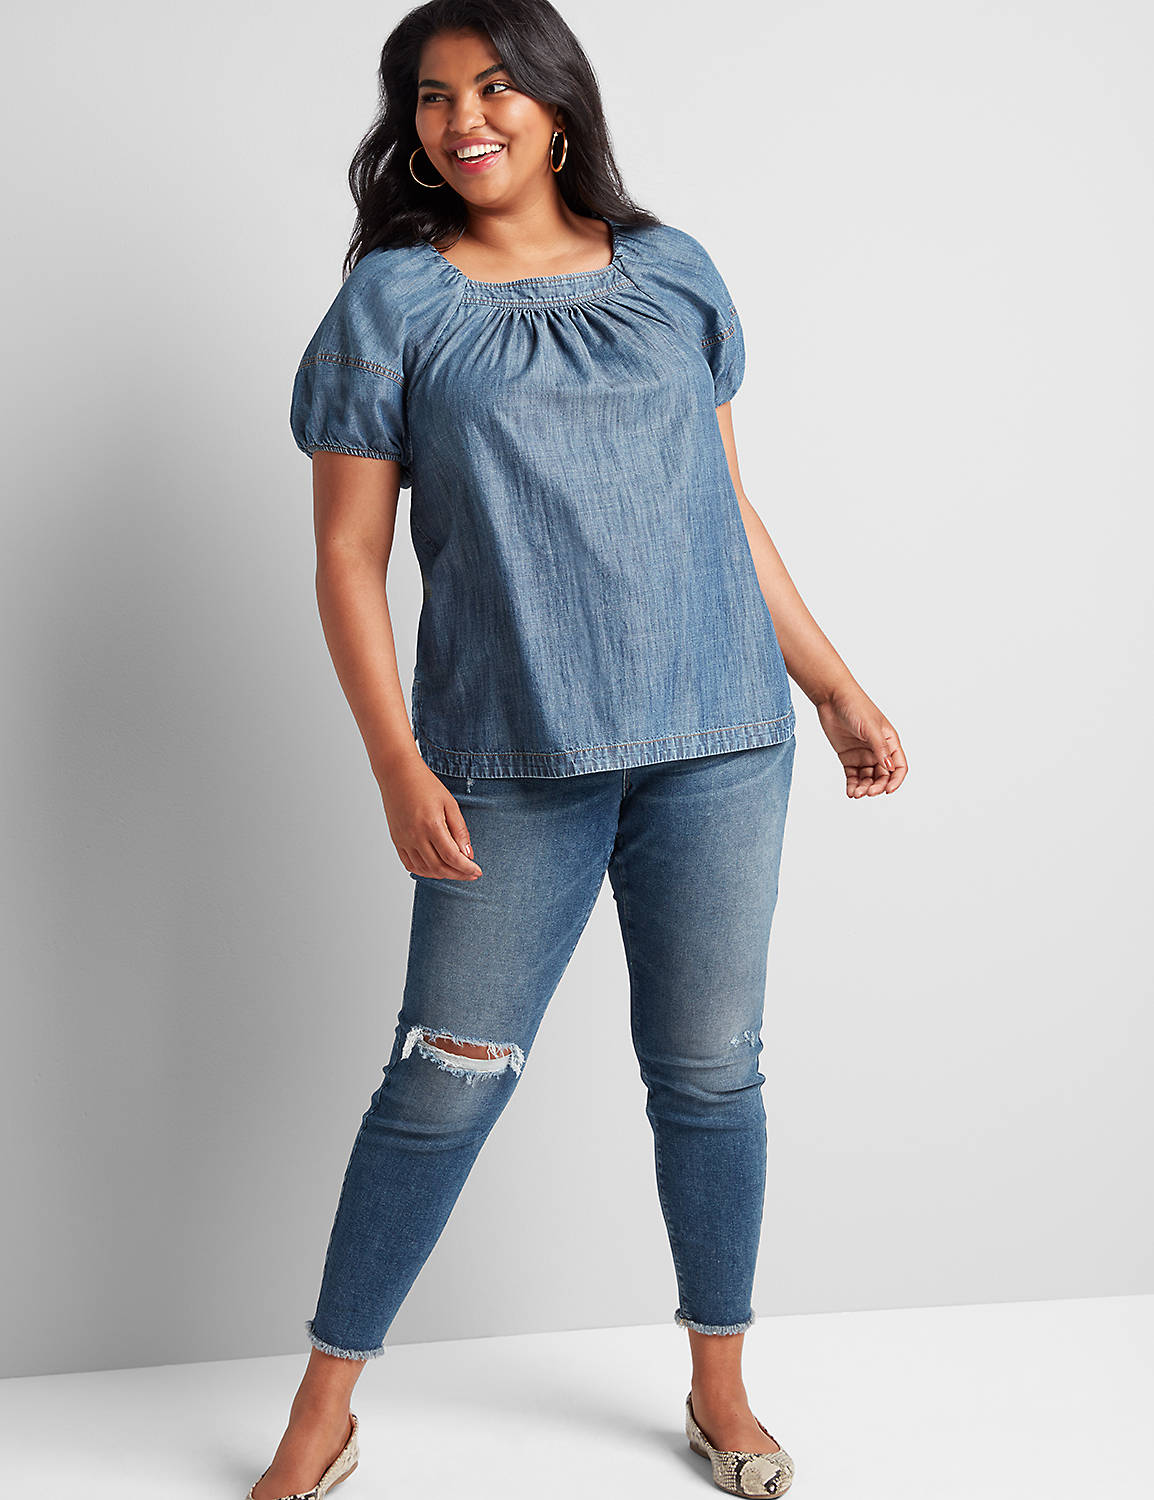 Short Sleeve Square Neck Popover Chambray Top 1114556:Denim Chambray:12 Product Image 3